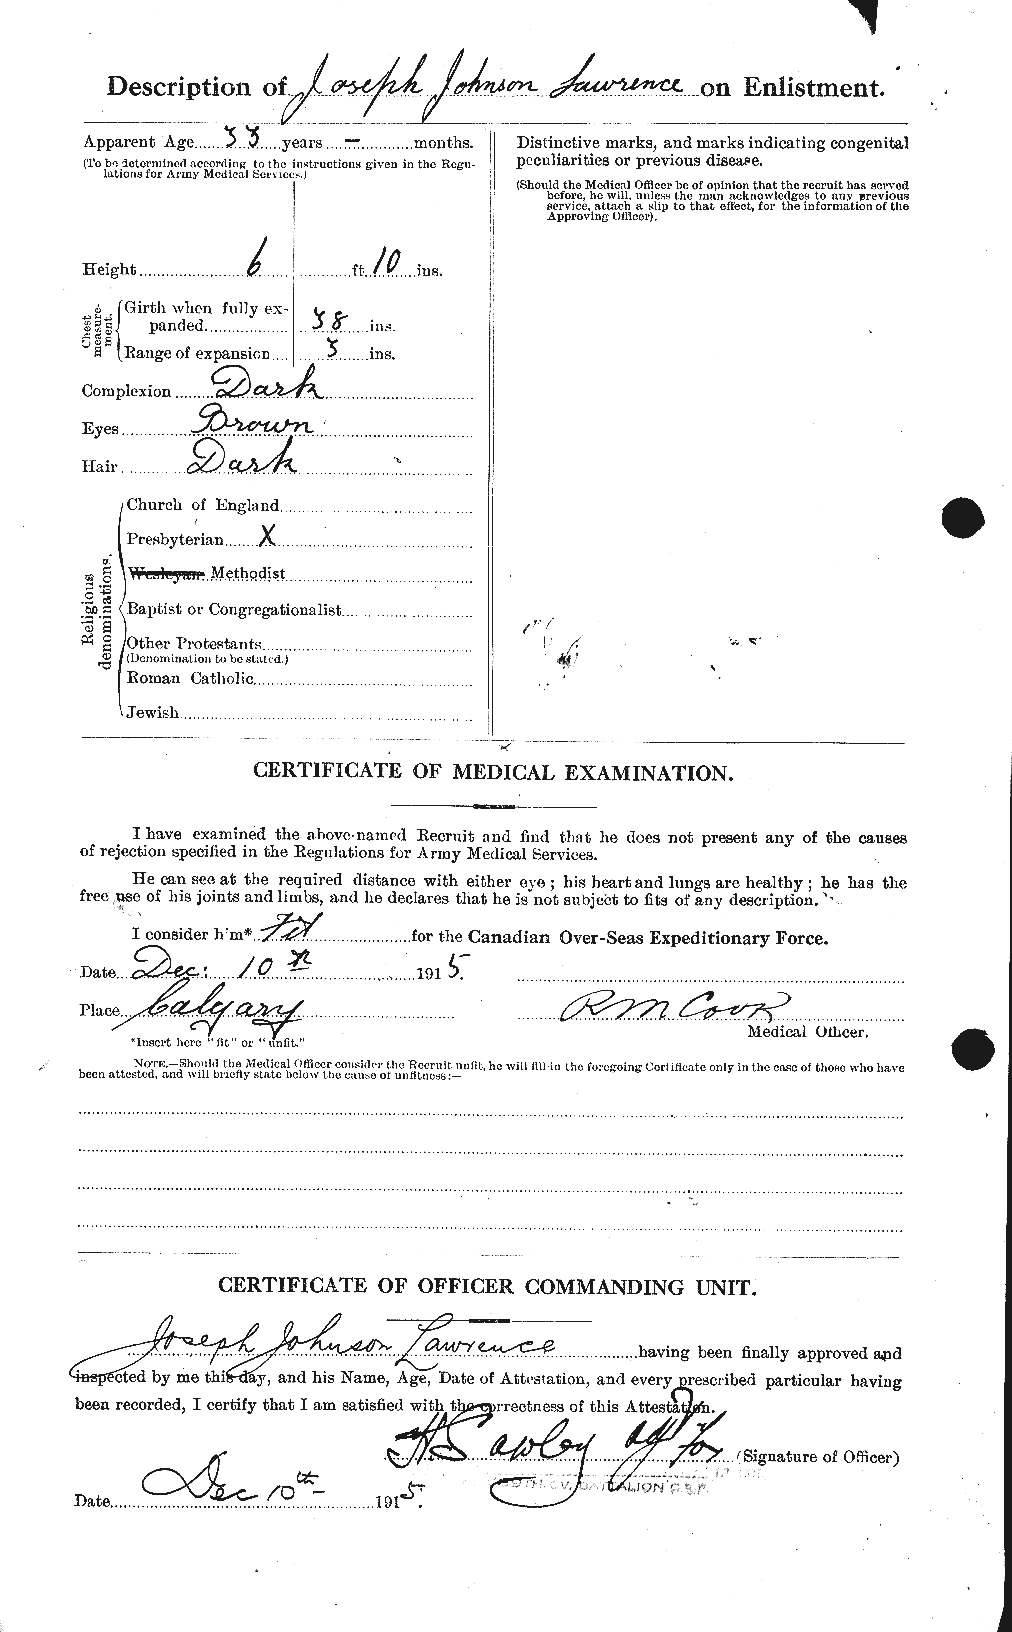 Personnel Records of the First World War - CEF 452401b